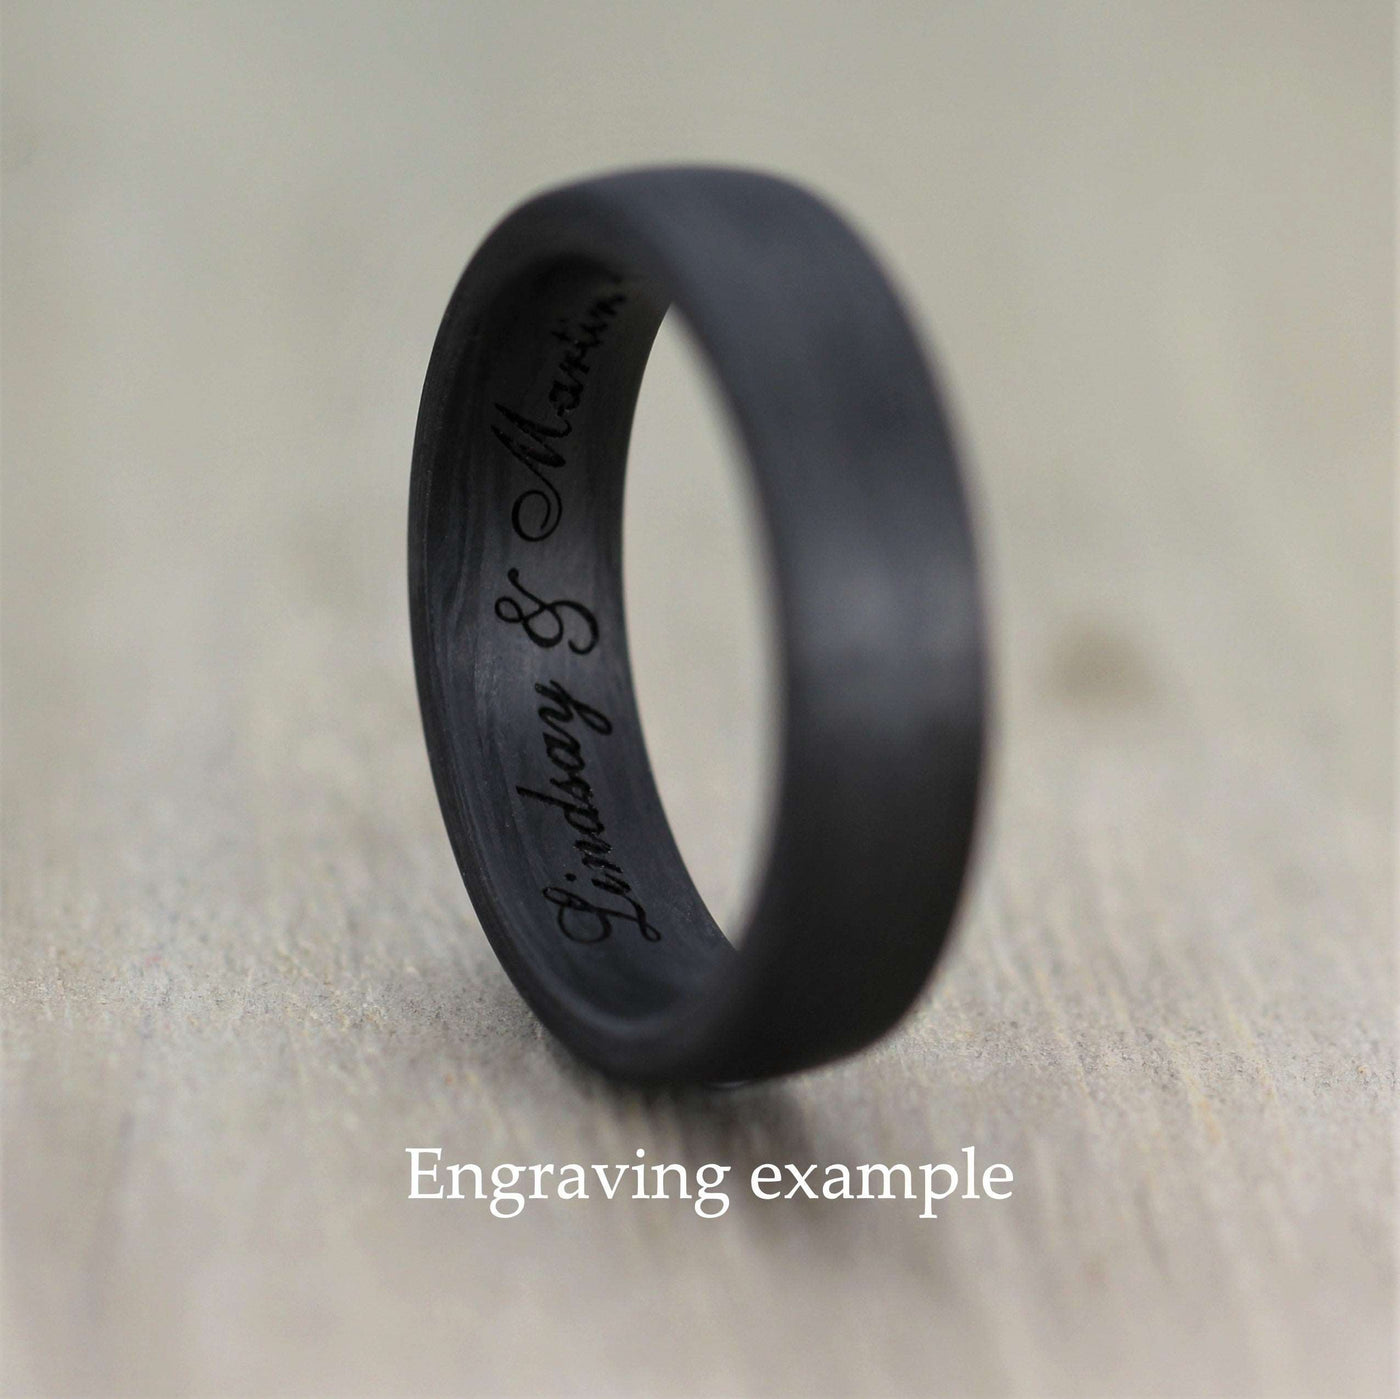 Flat Court, Forged Carbon Fibre with comfort fit Wedding Ring & FREE Engraving! (7 to 9mm)